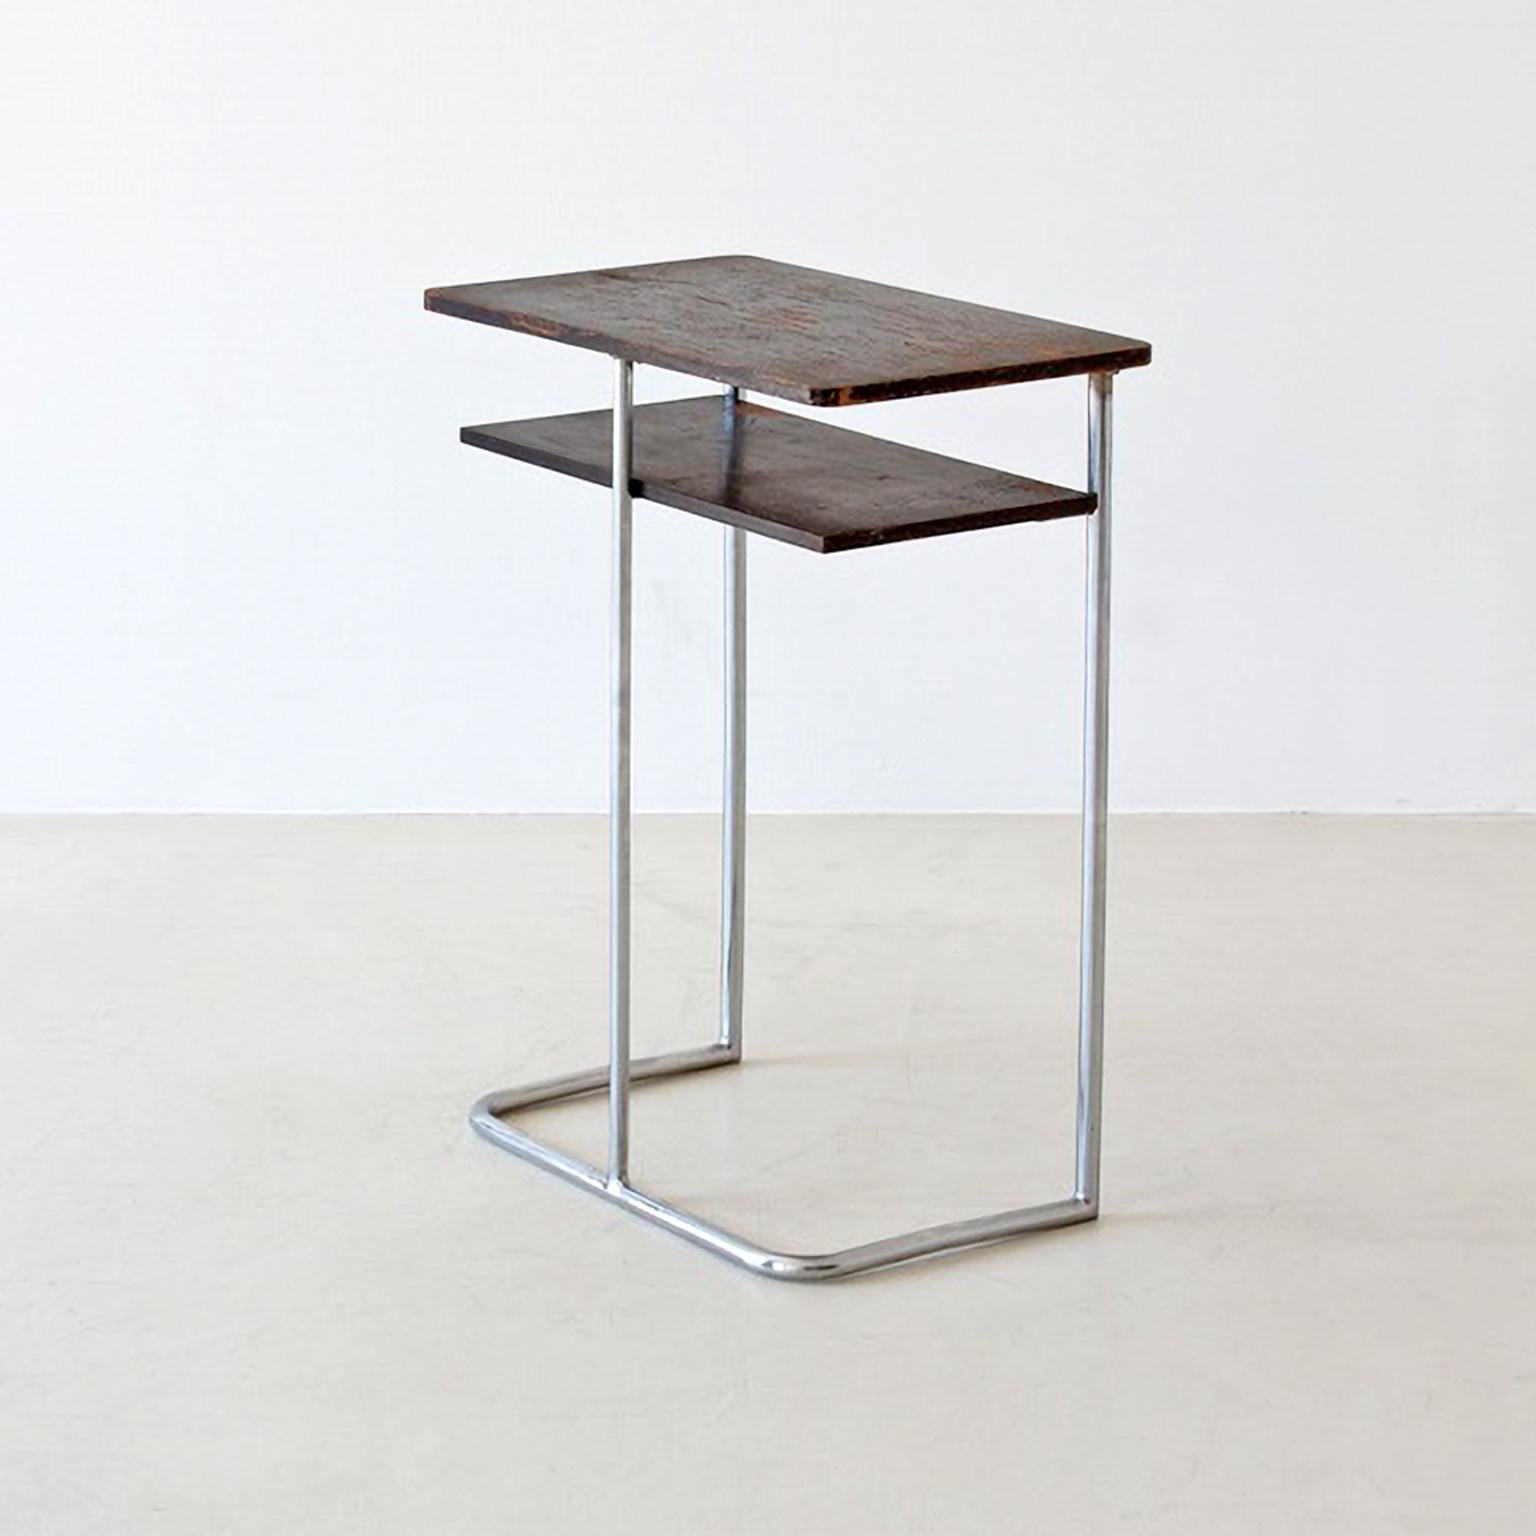 German Small Modernist Writing Table, Chromed Steel, Veneered/ Lacquered Wood, Bespoke For Sale